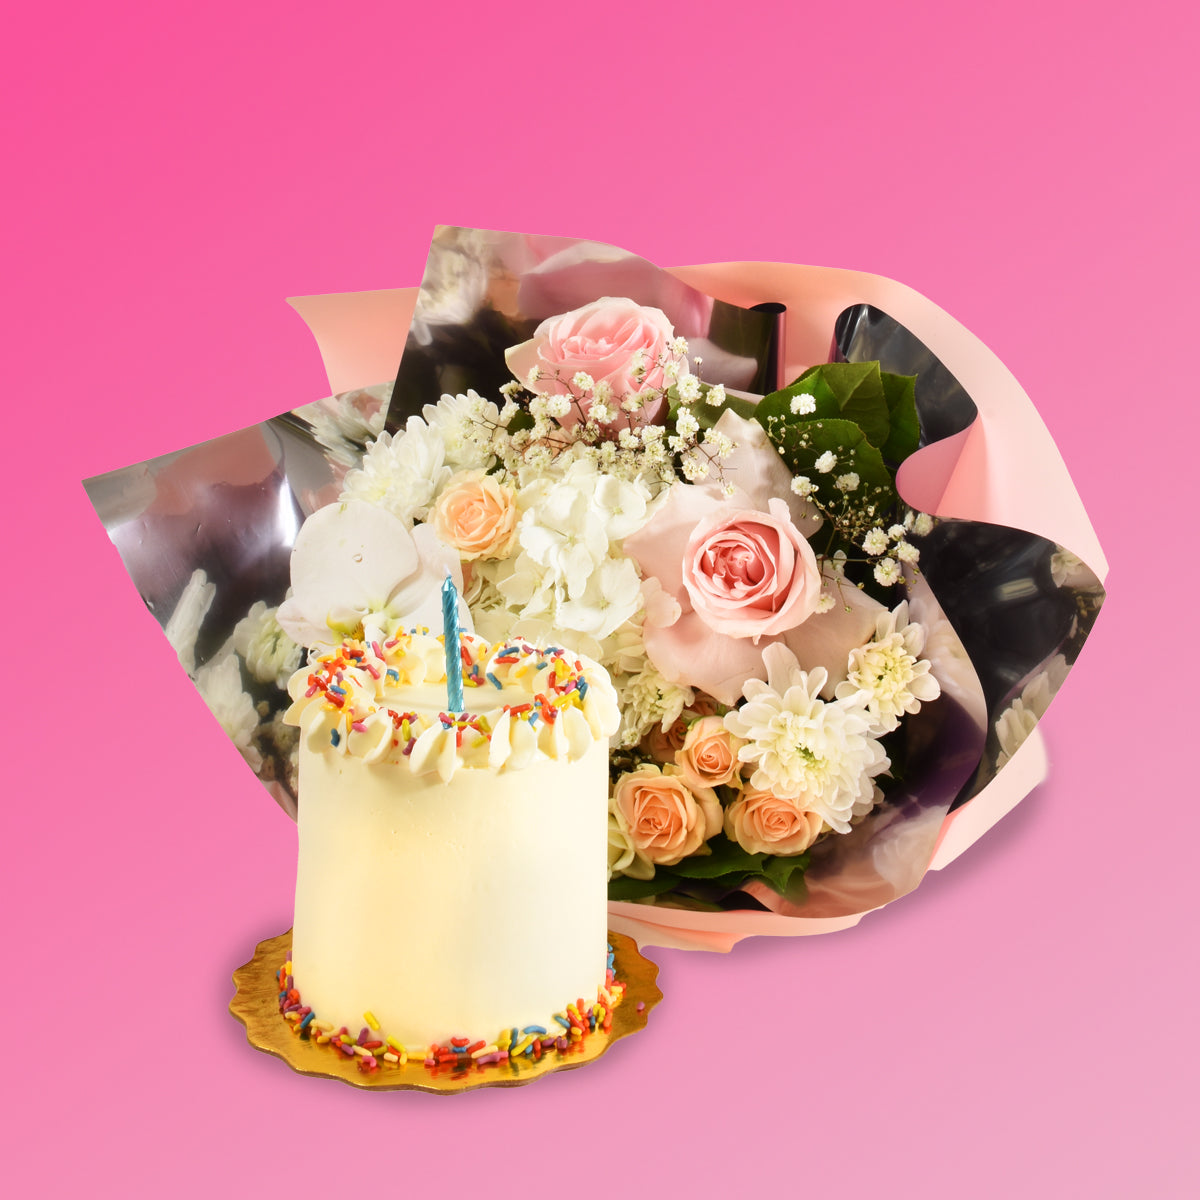 New Launch! Flowers and Cake for delivery in Vancouver by Adele Rae Florist